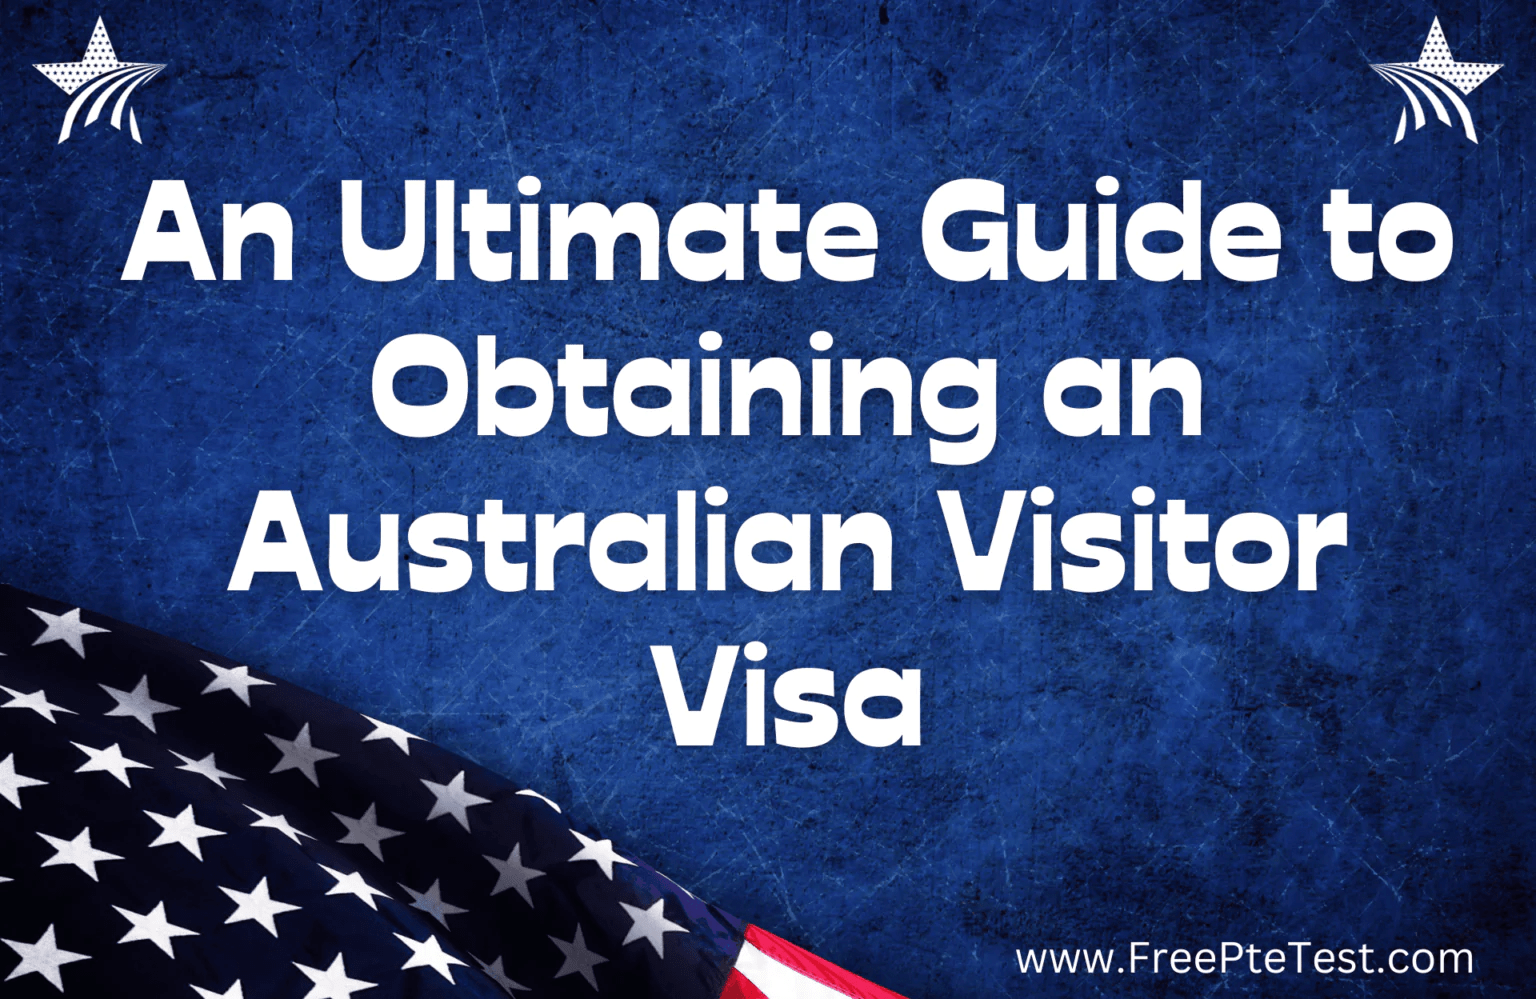 An Ultimate Guide to Obtaining an Australian Visitor Visa